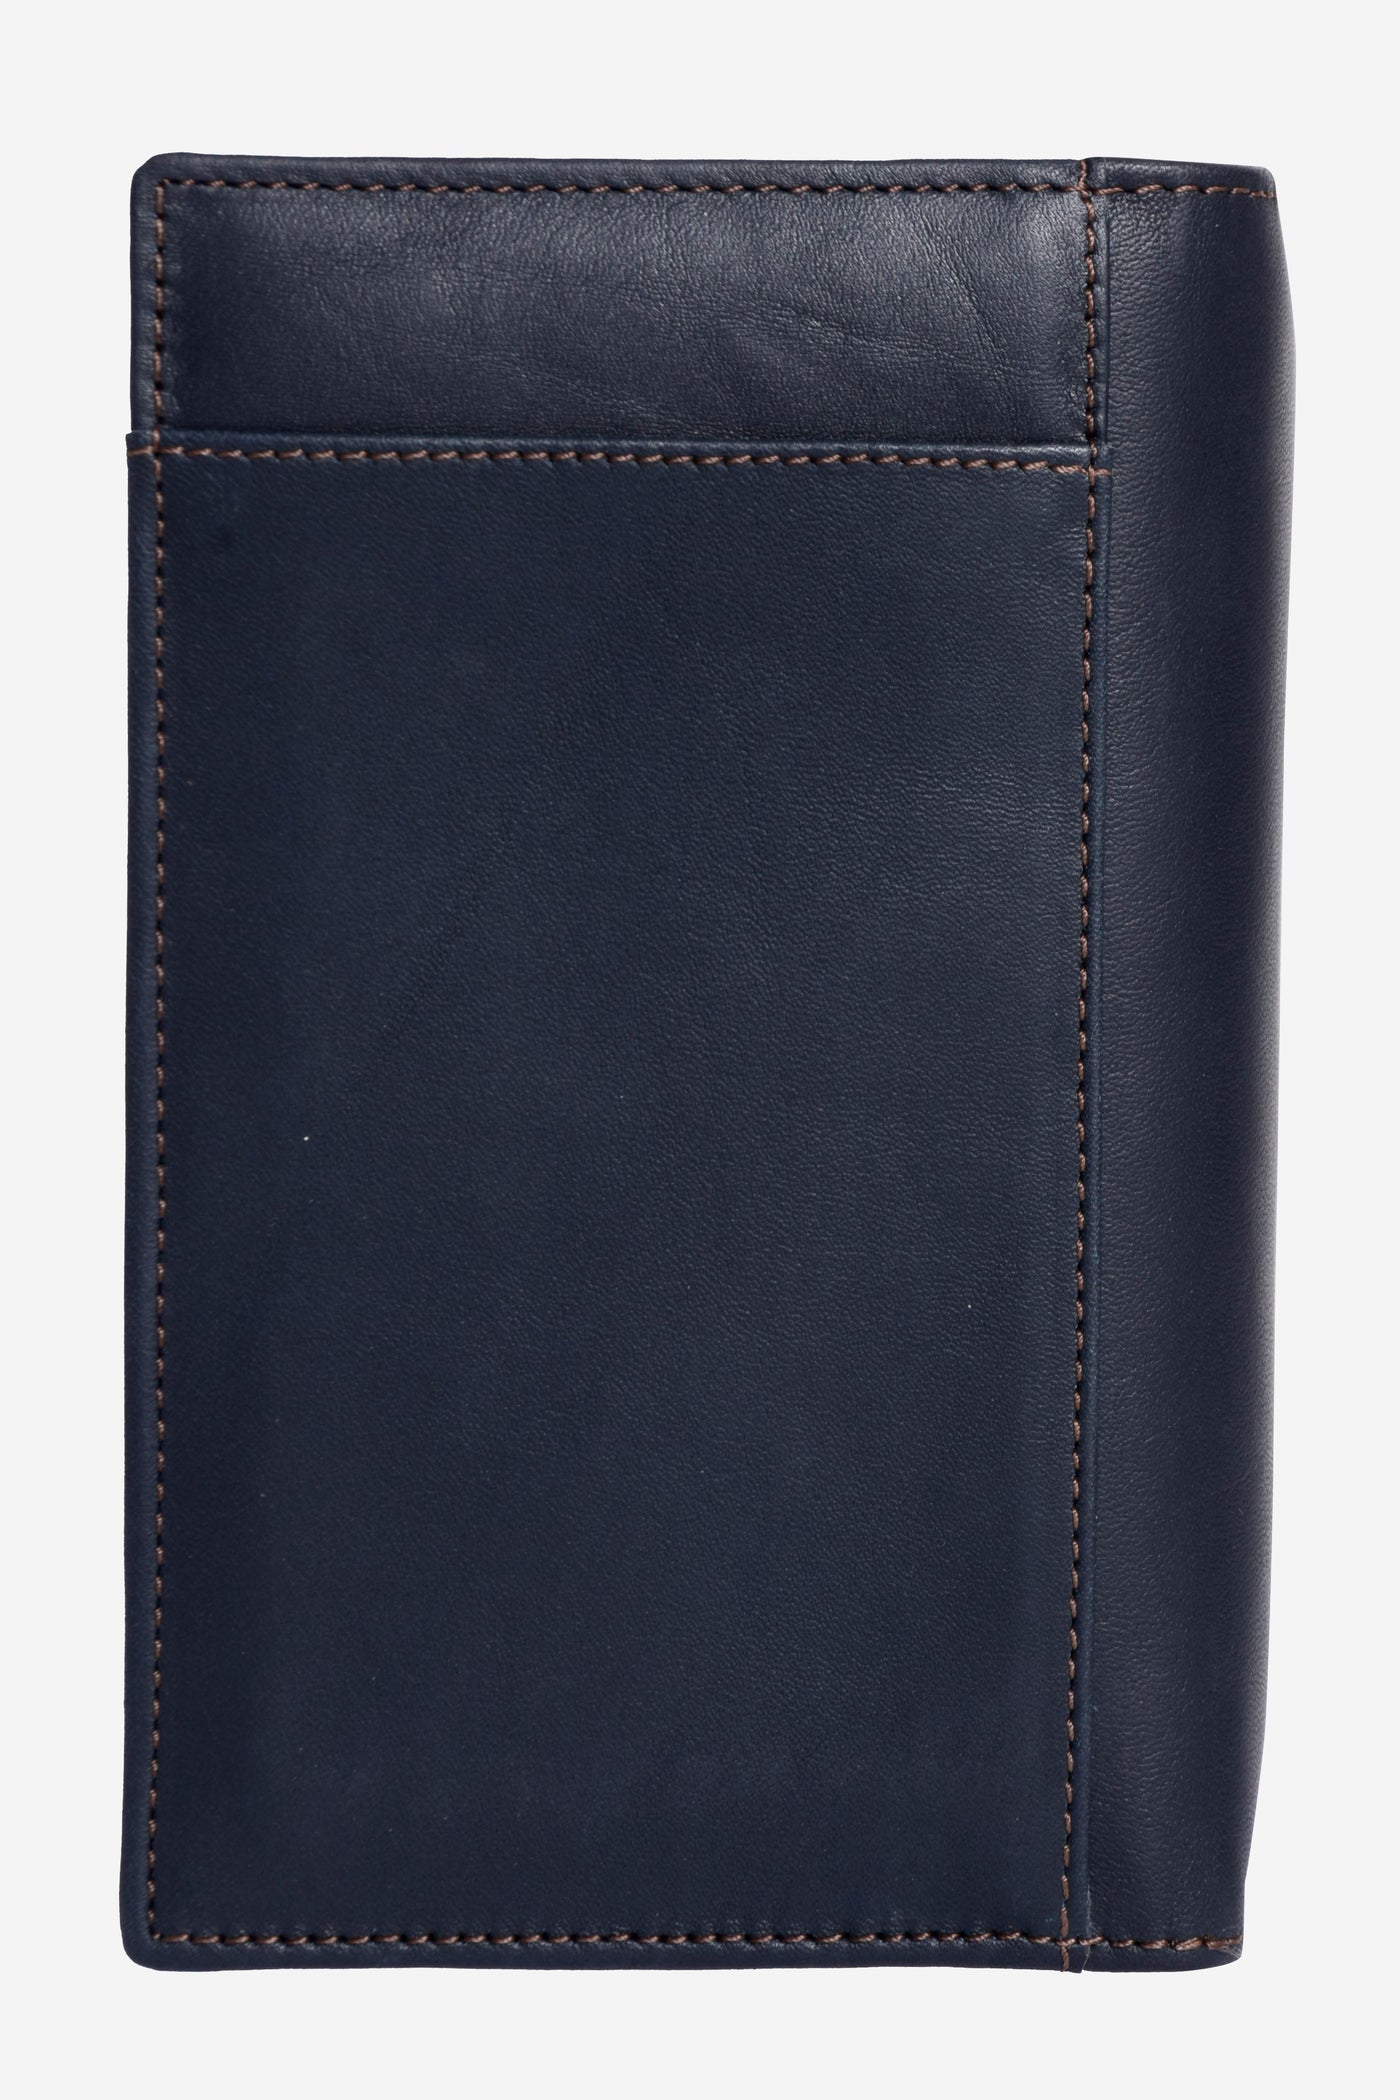 WAL008 / Midnight Blue Leather Wallet